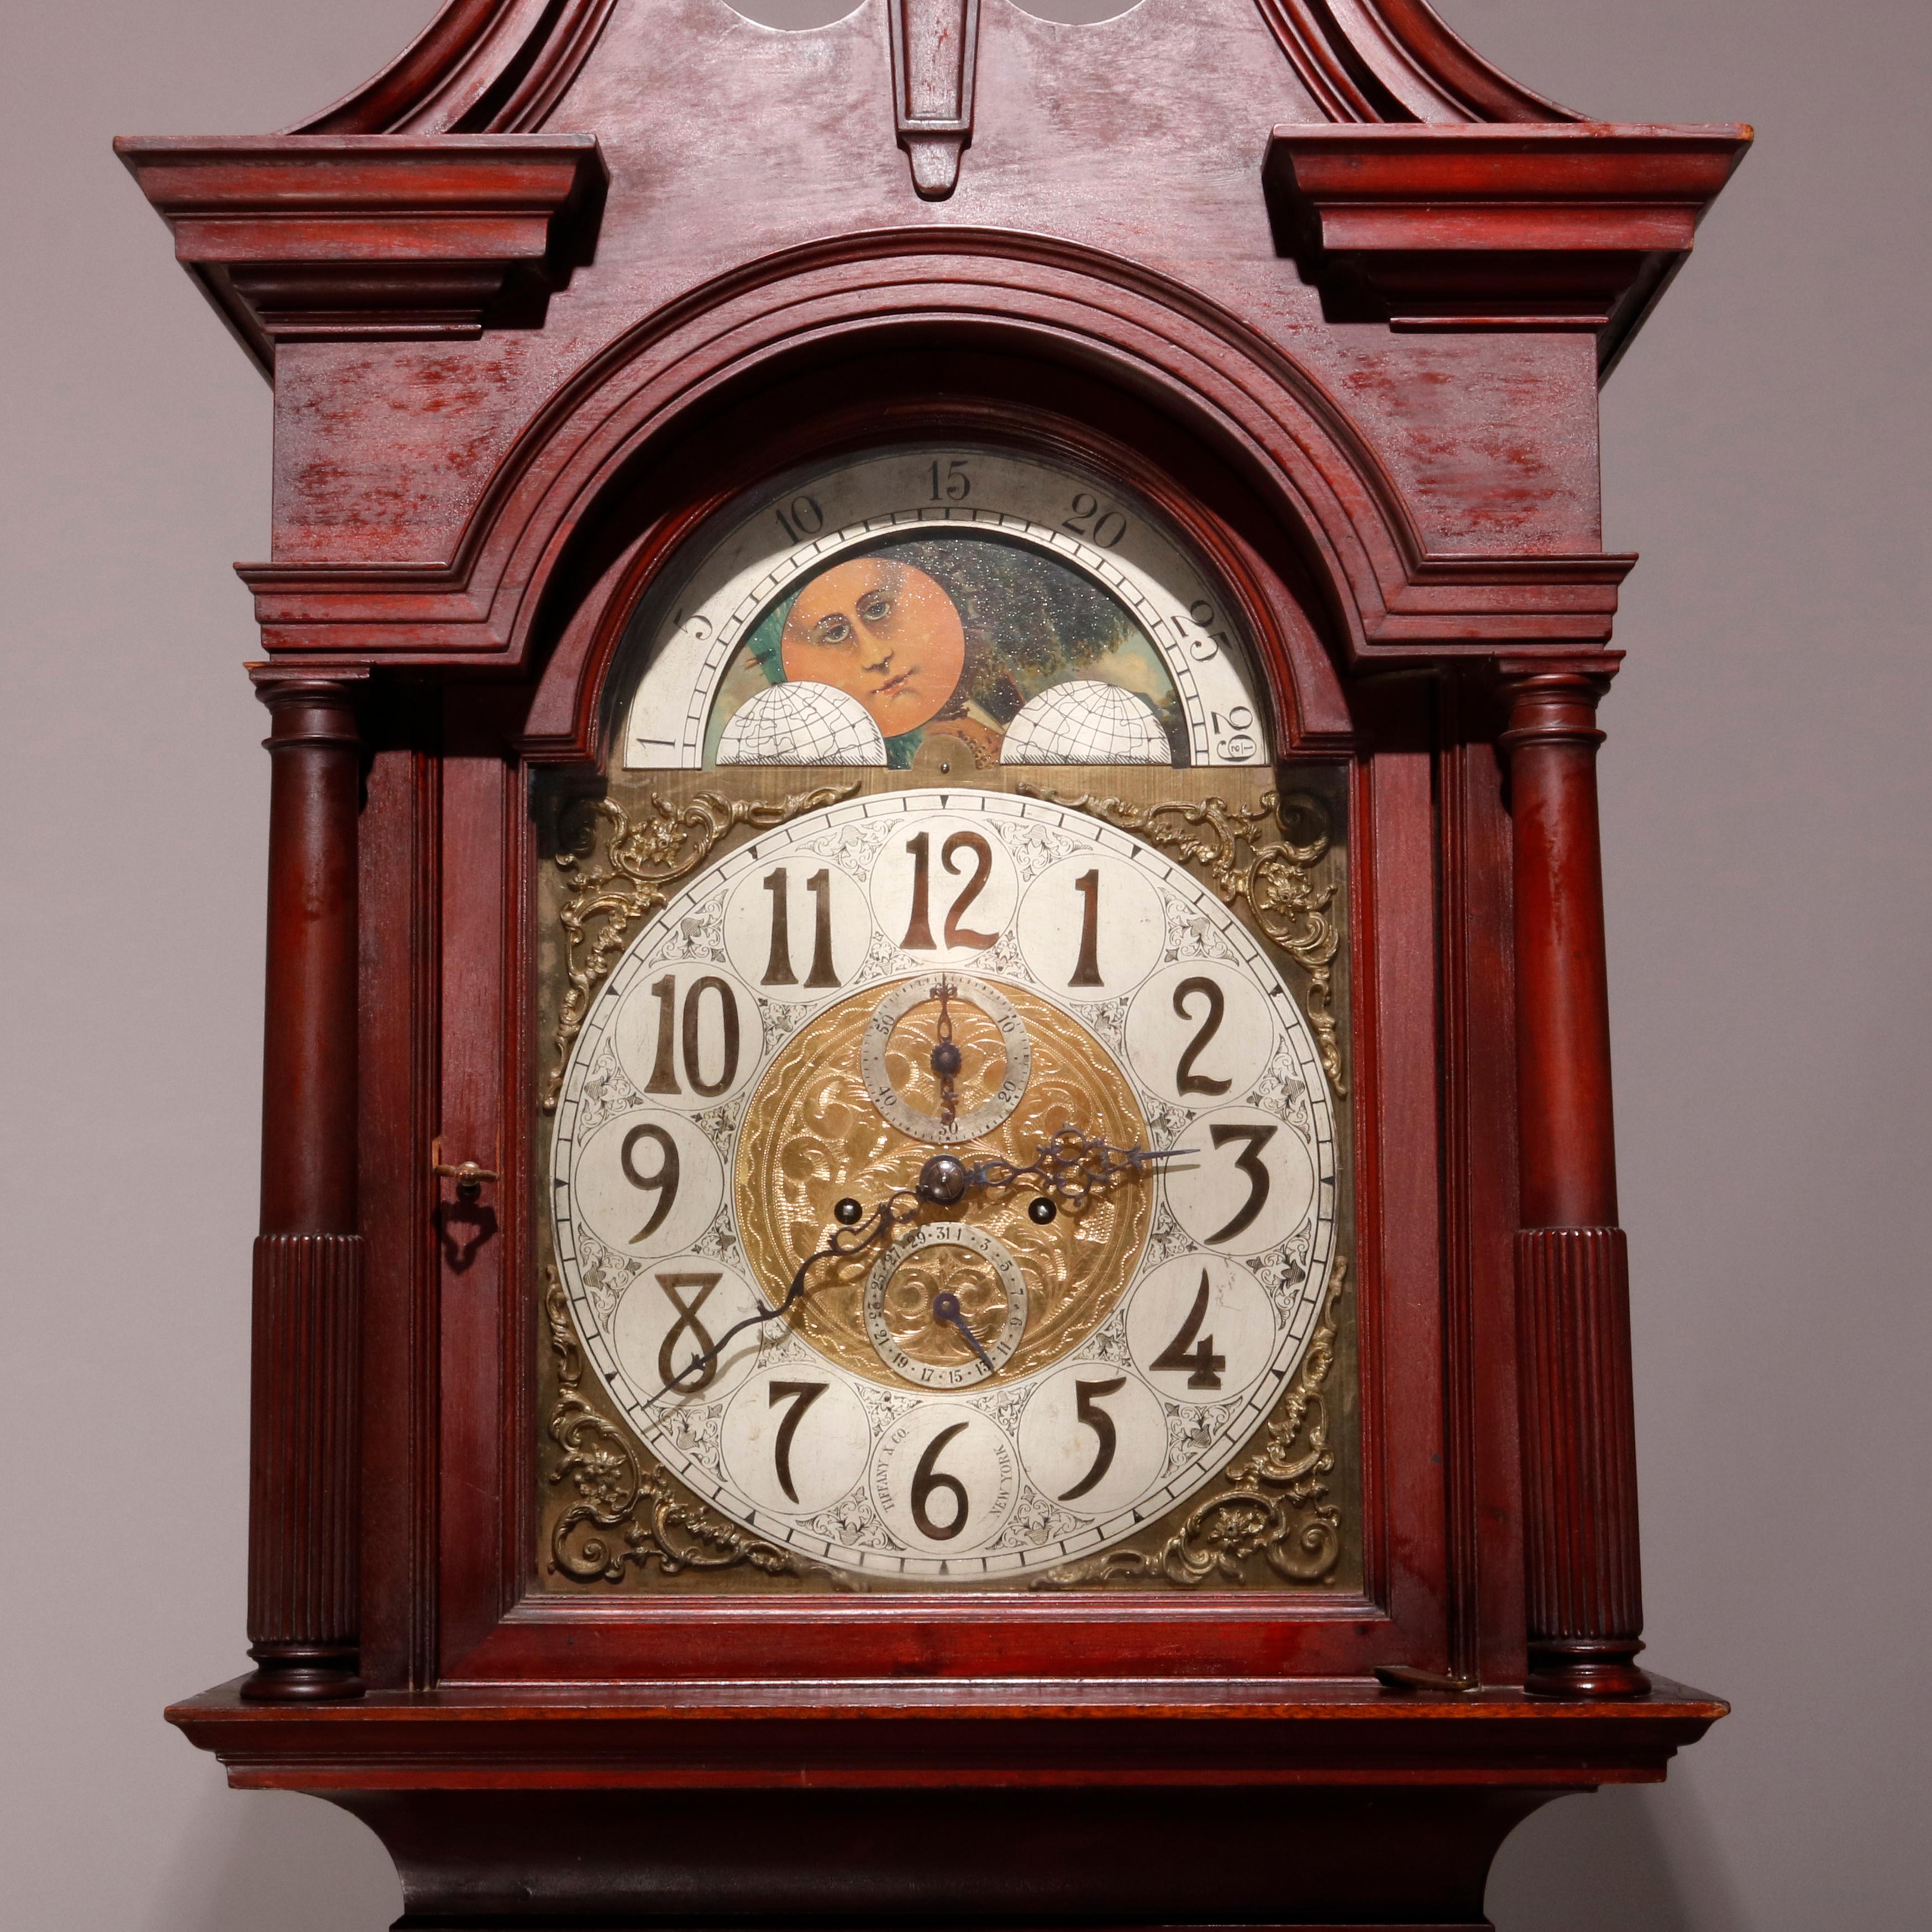 An antique Federal style long case clock by Tiffany & Co offers mahogany case with broken arch pediment having central urn form finial surmounting moon phase face with Arabic numerals, seconds and date dials, flanked by Doric columns with reeded